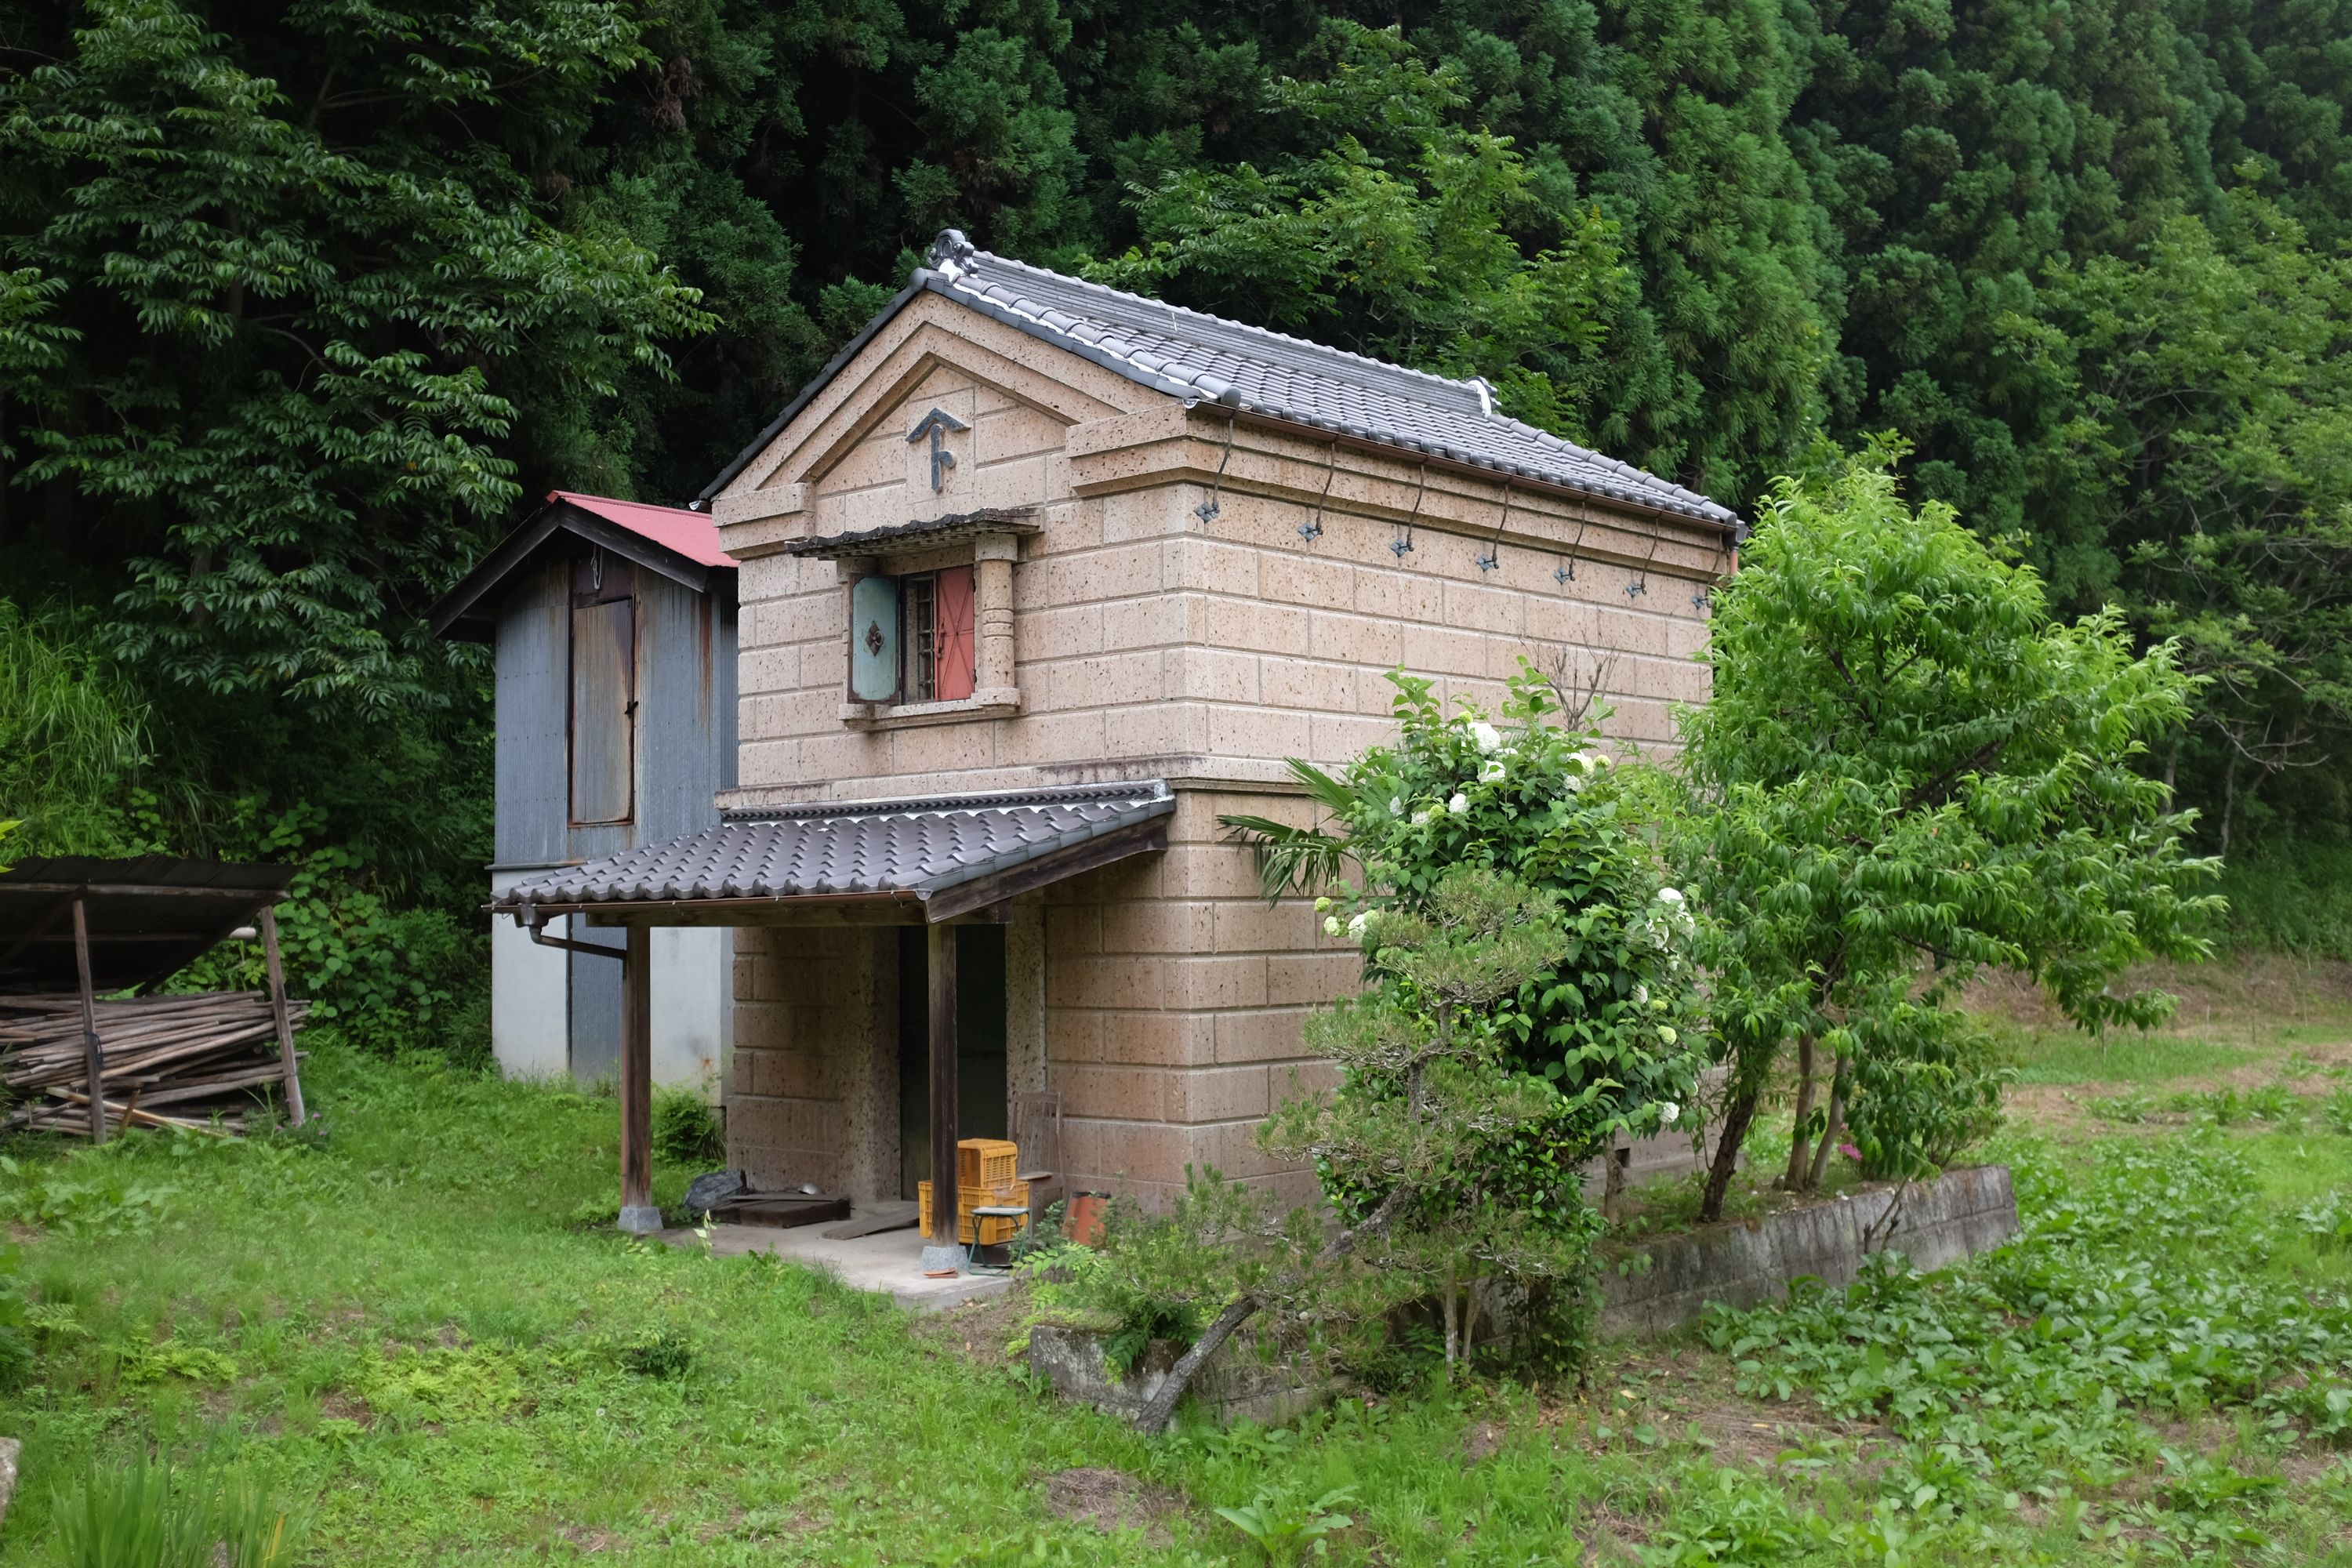 A kura, a Japanese storehouse, stand by a forested hillside.